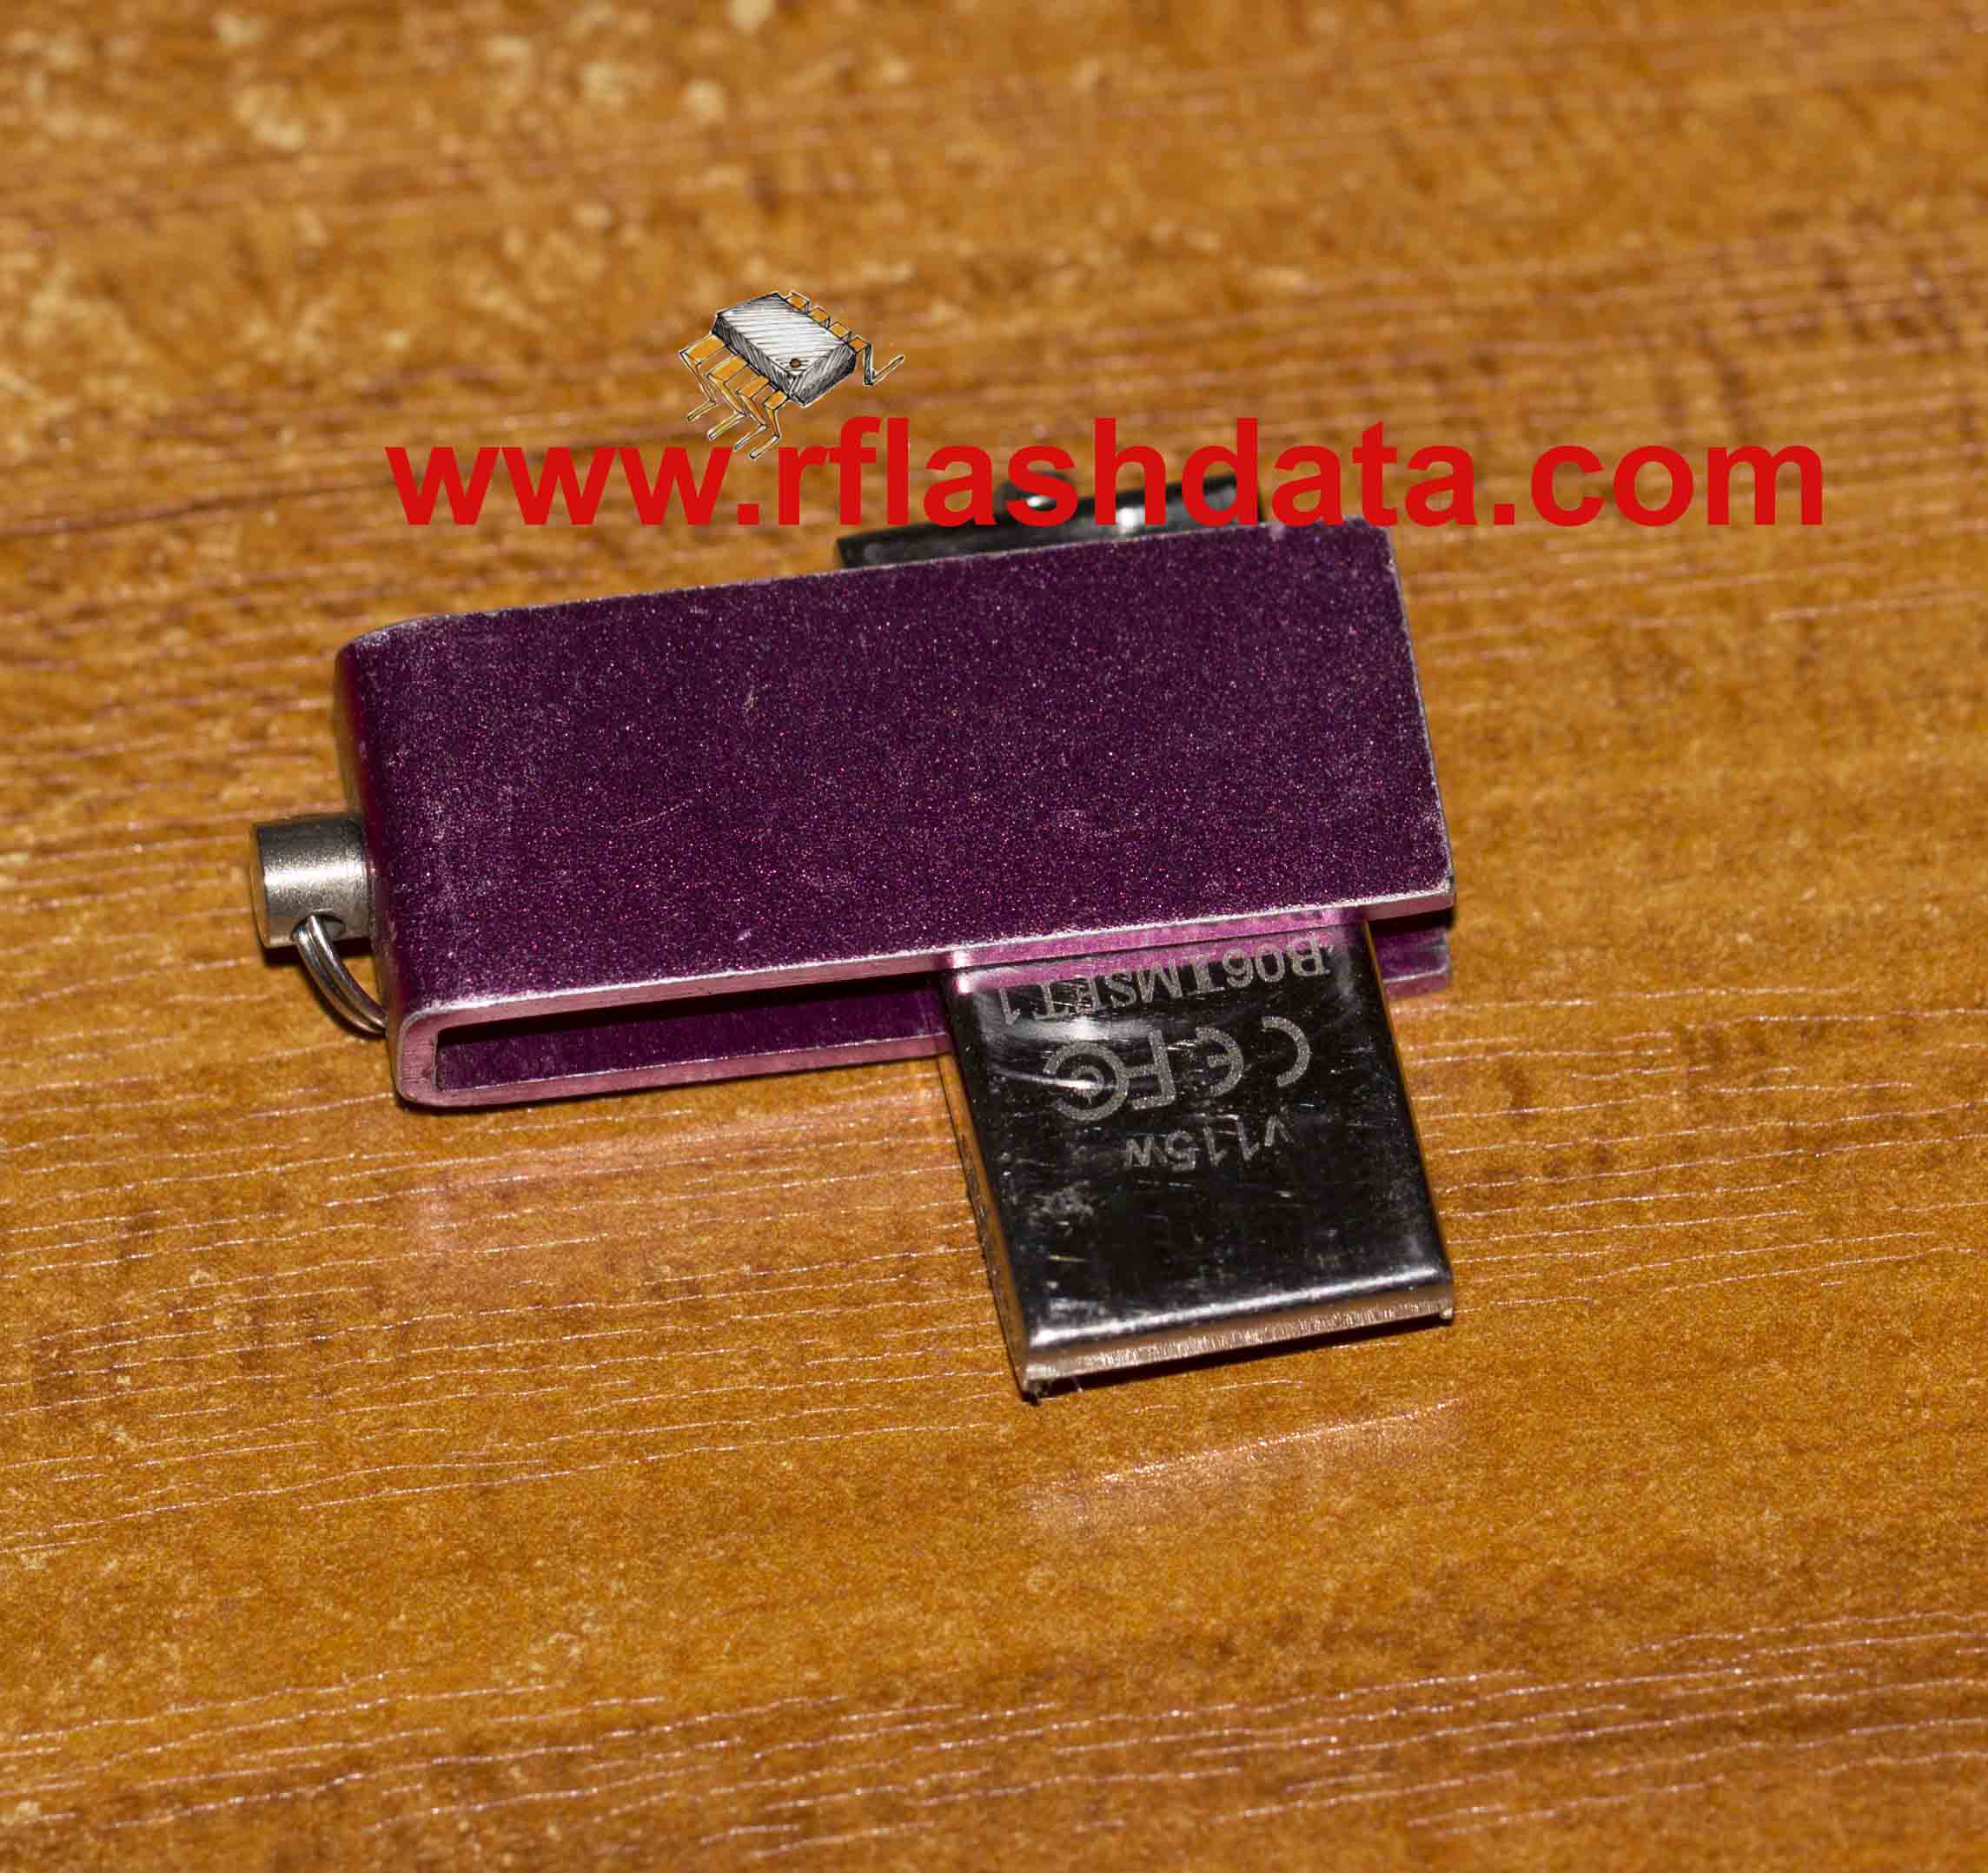 USB flash drive data recovery